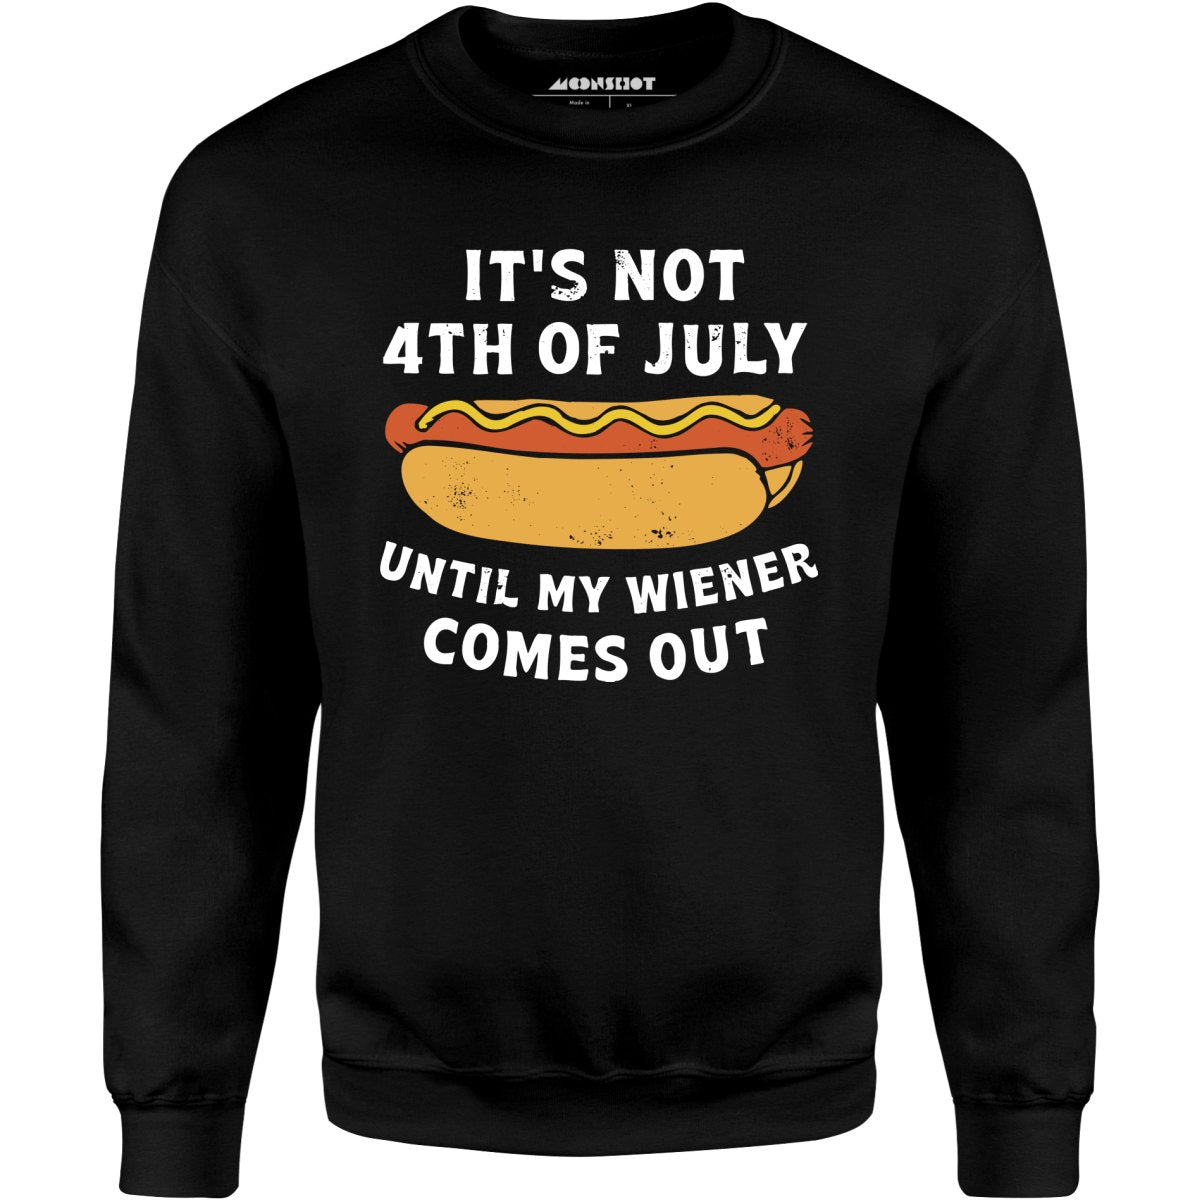 It's Not 4th of July Until My Wiener Comes Out - Unisex Sweatshirt